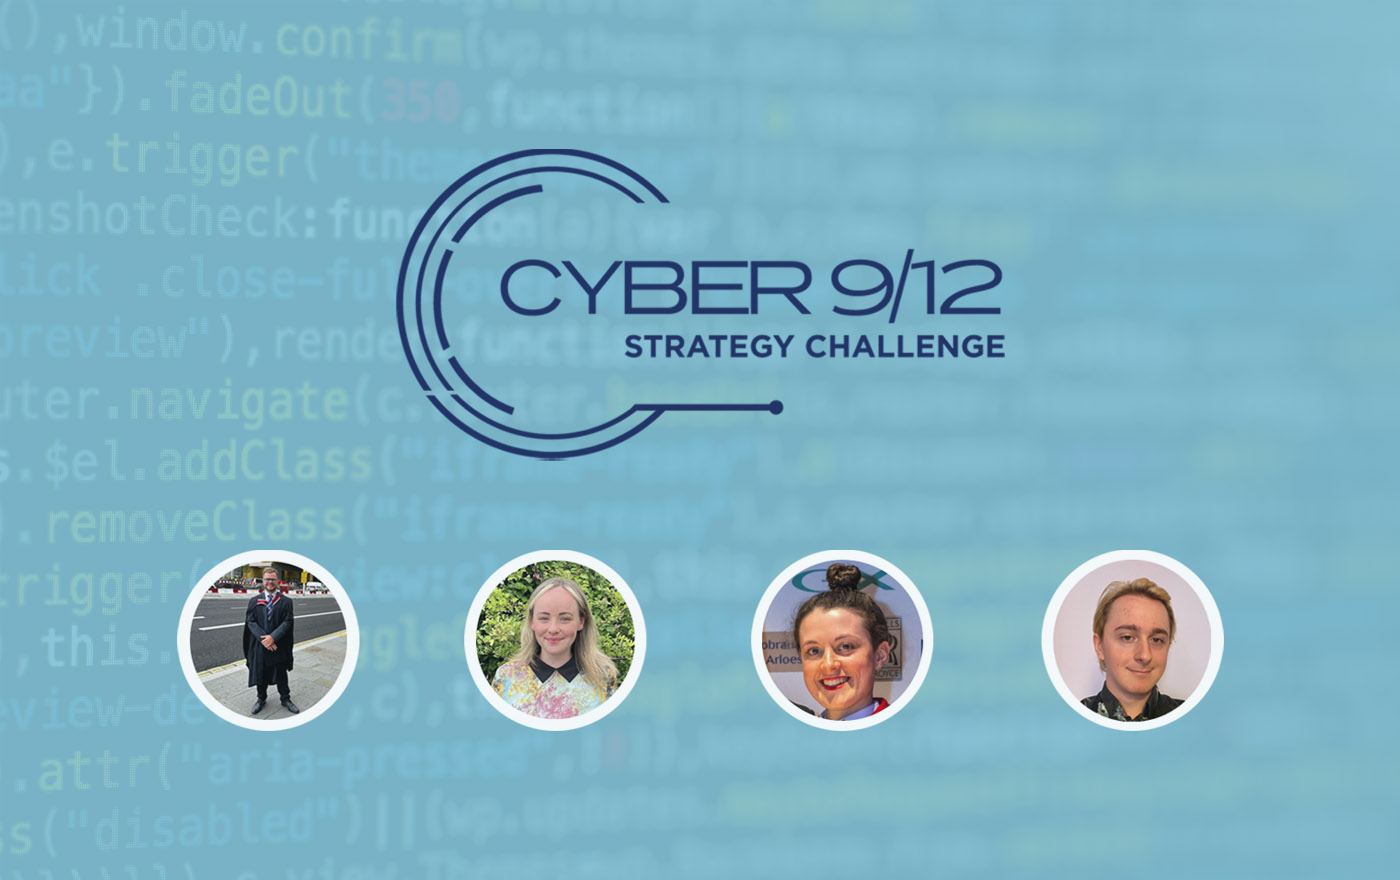 Swansea Team Excels in Cyber 9/12 Competition